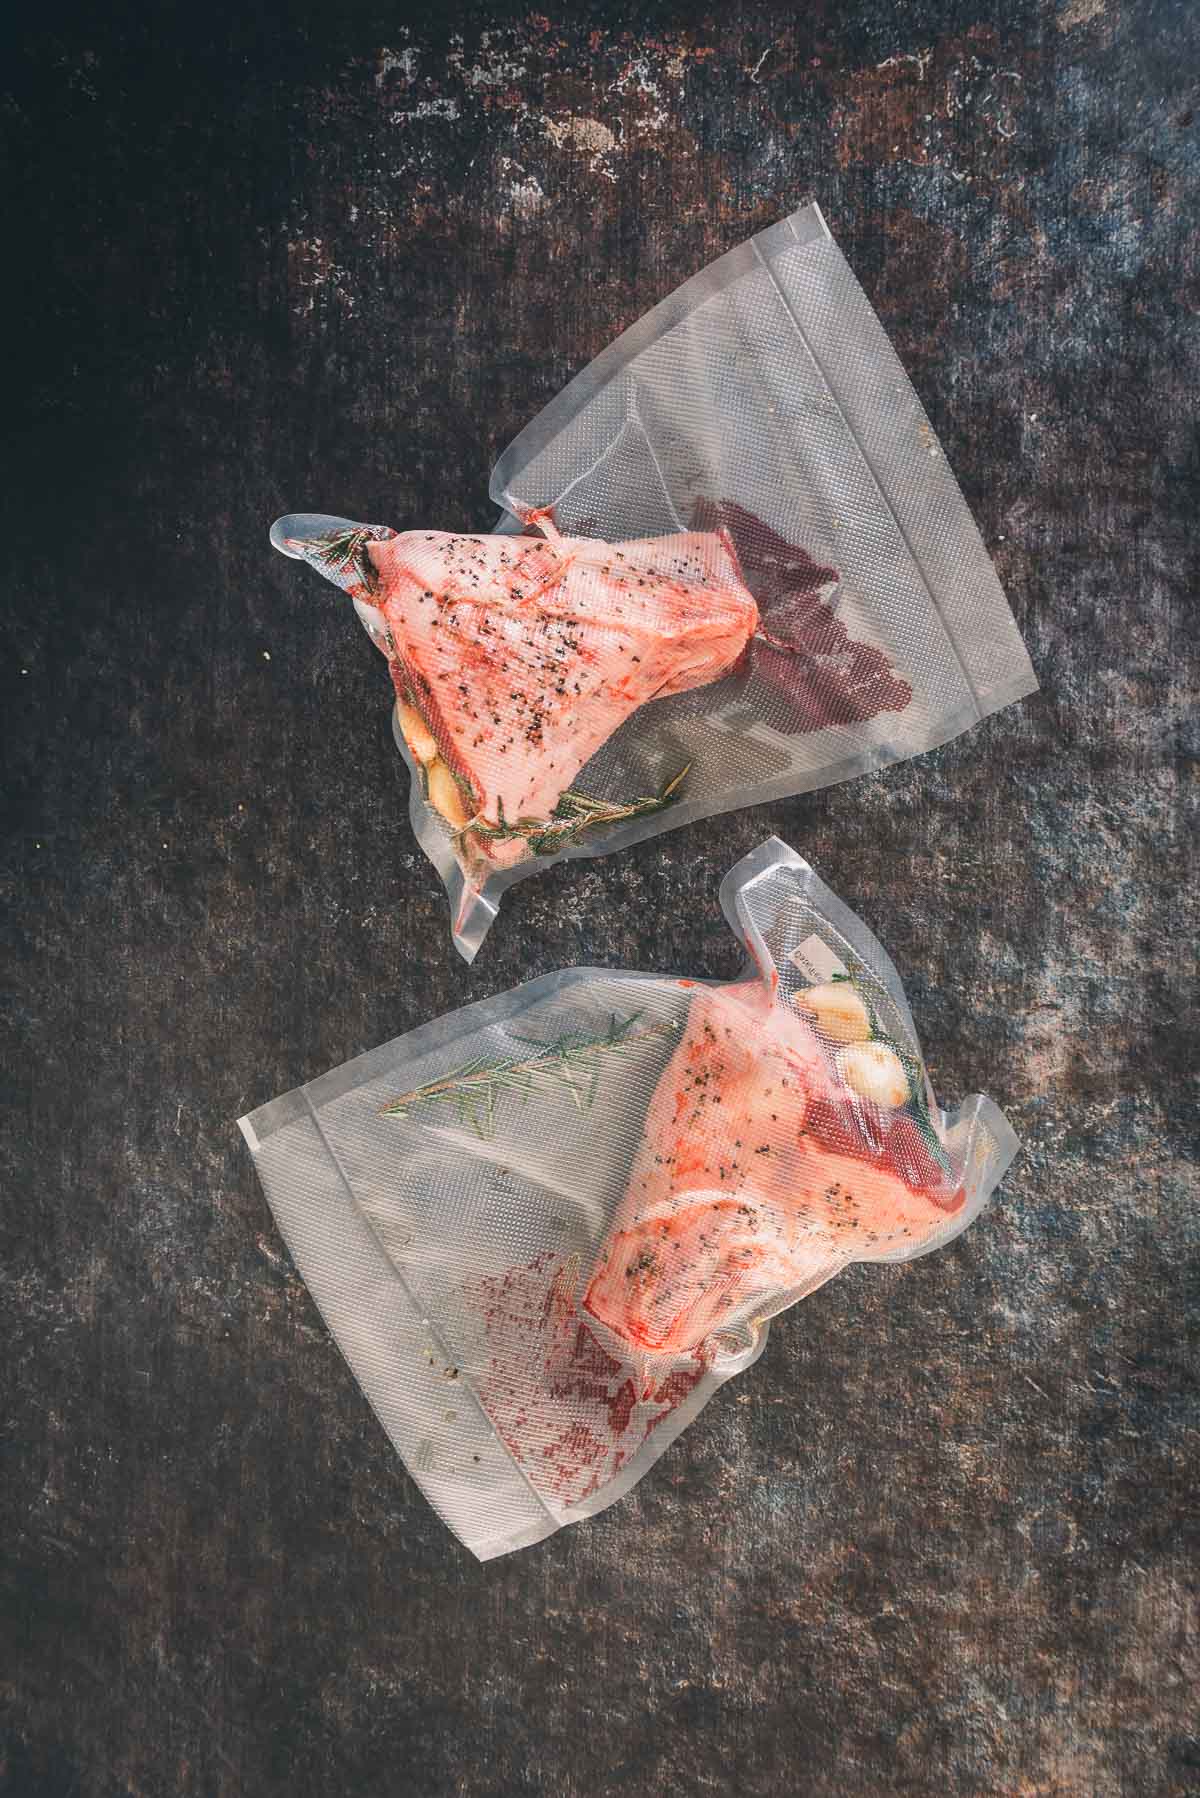 Two lamb shanks in vacuum sealed bags on a dark background.